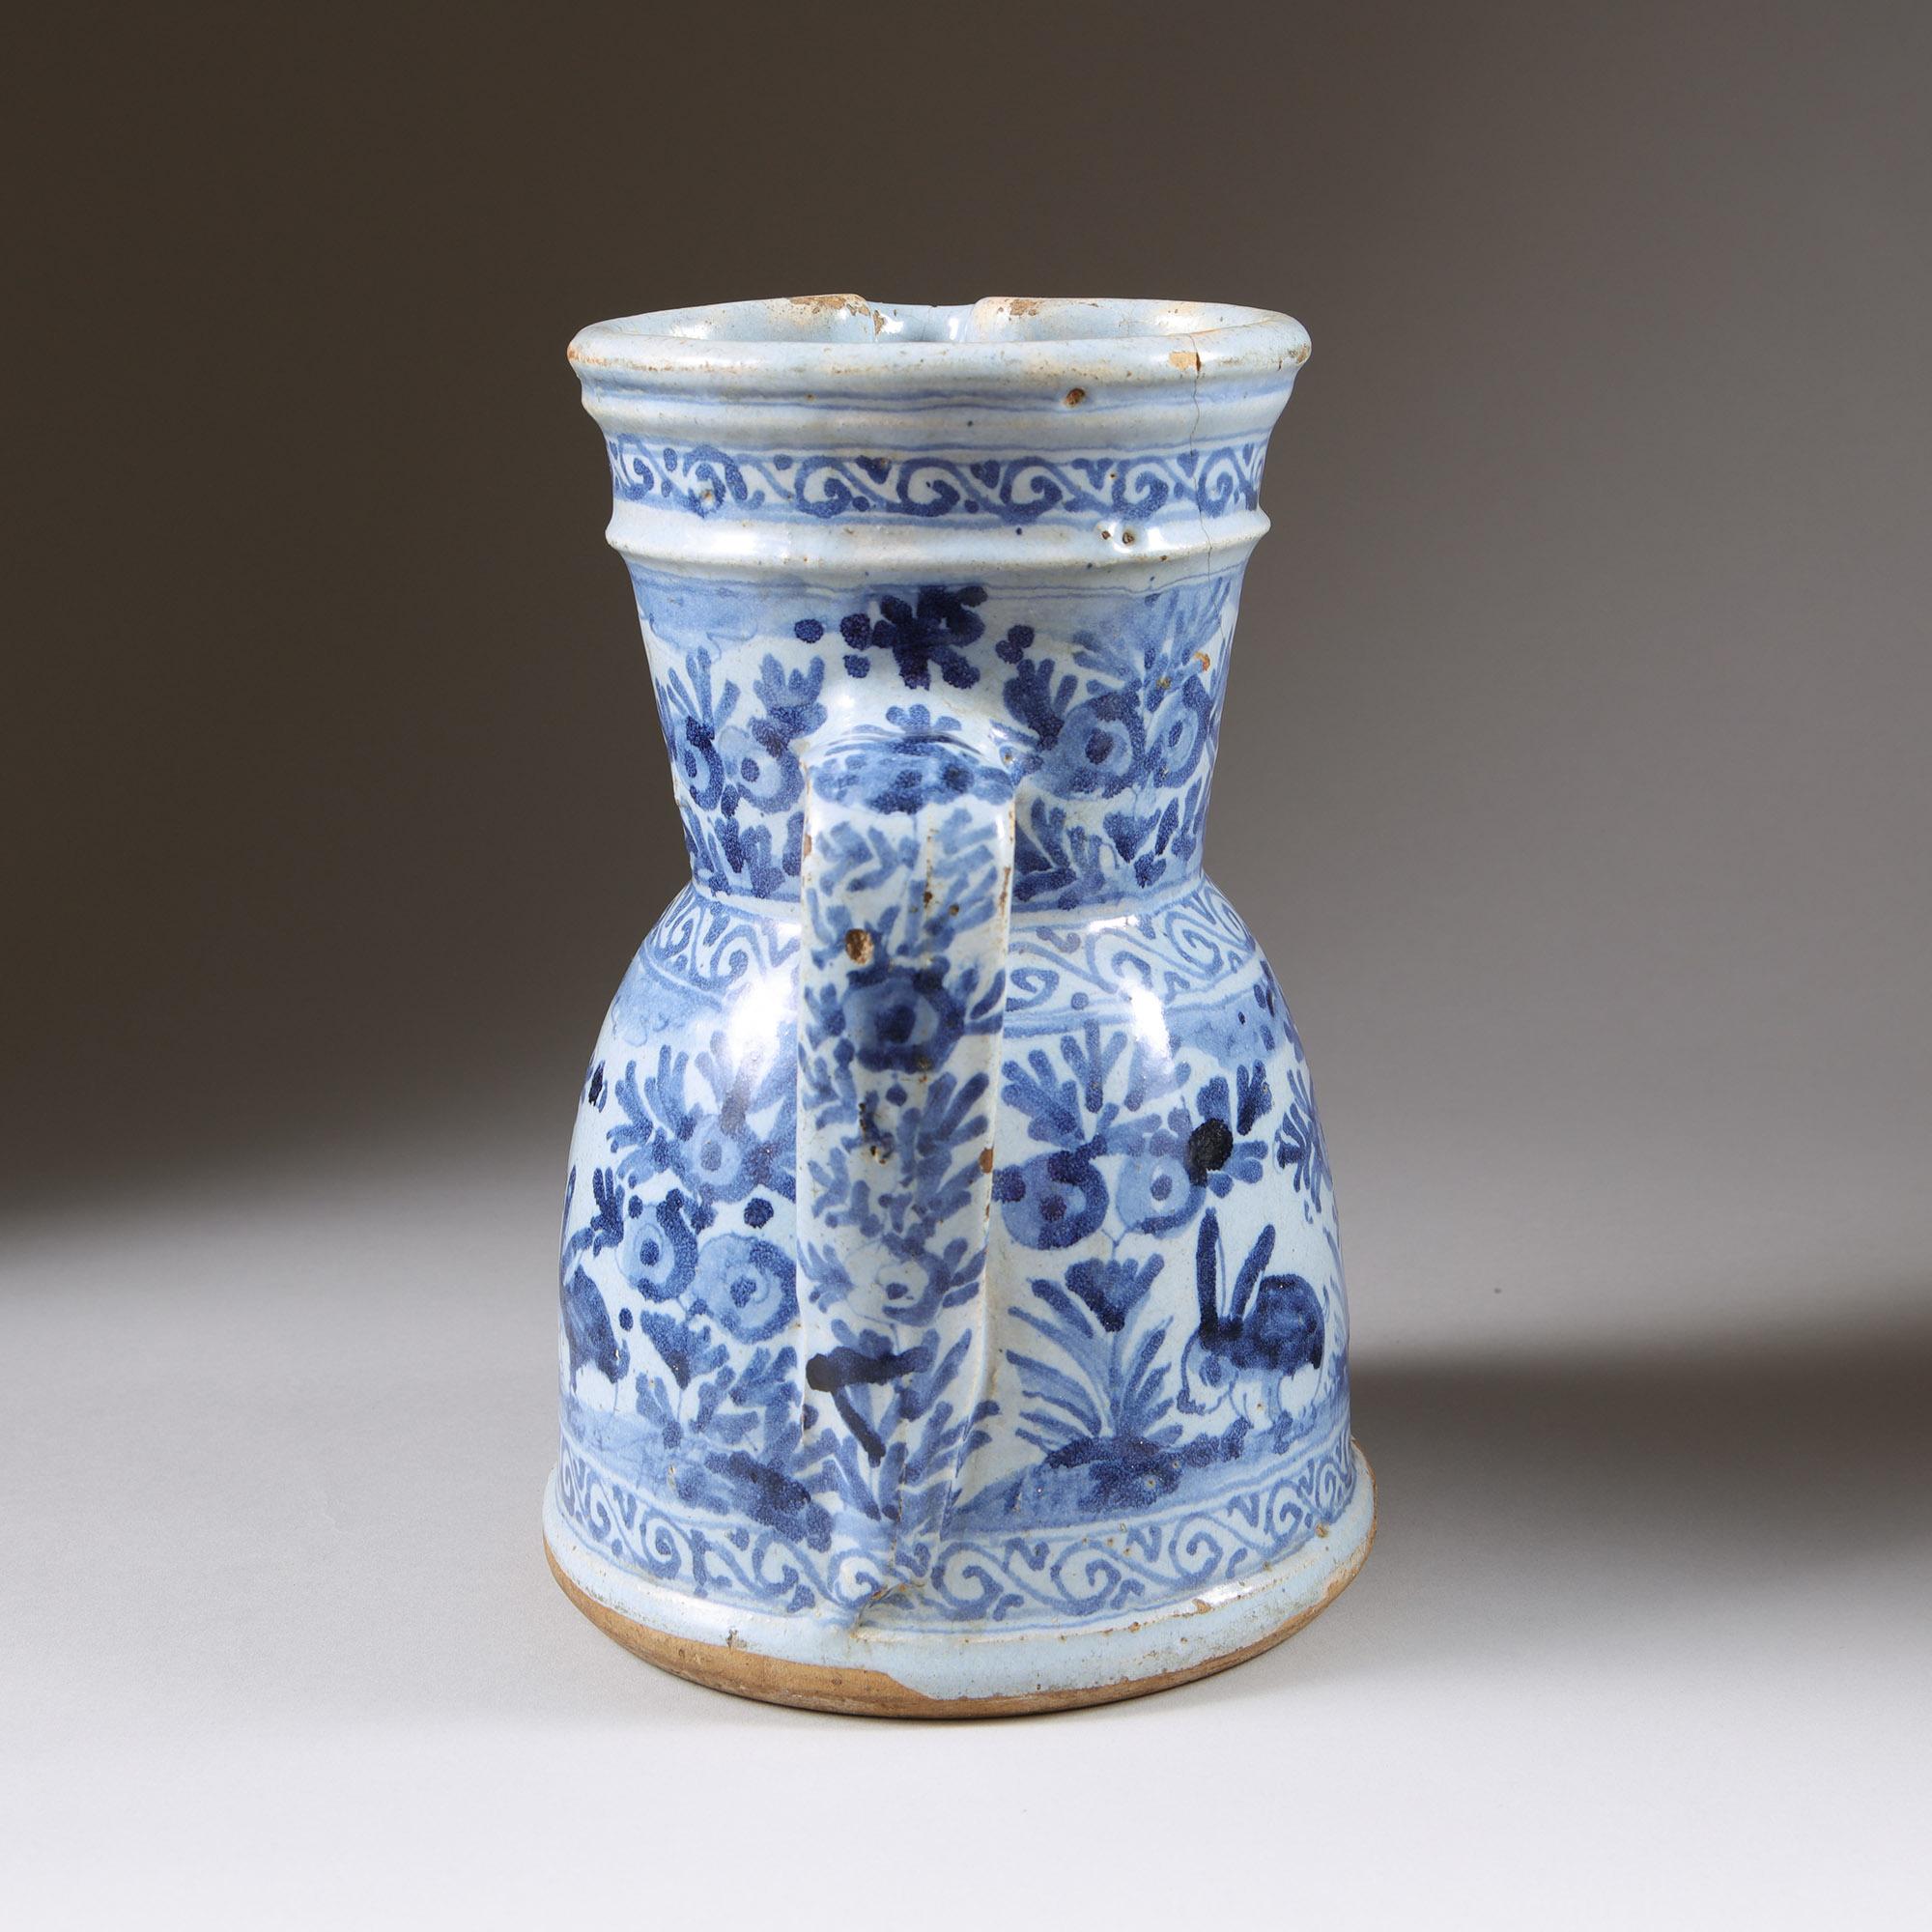 An unusual late 17th early 18th-Century Delft jug 3